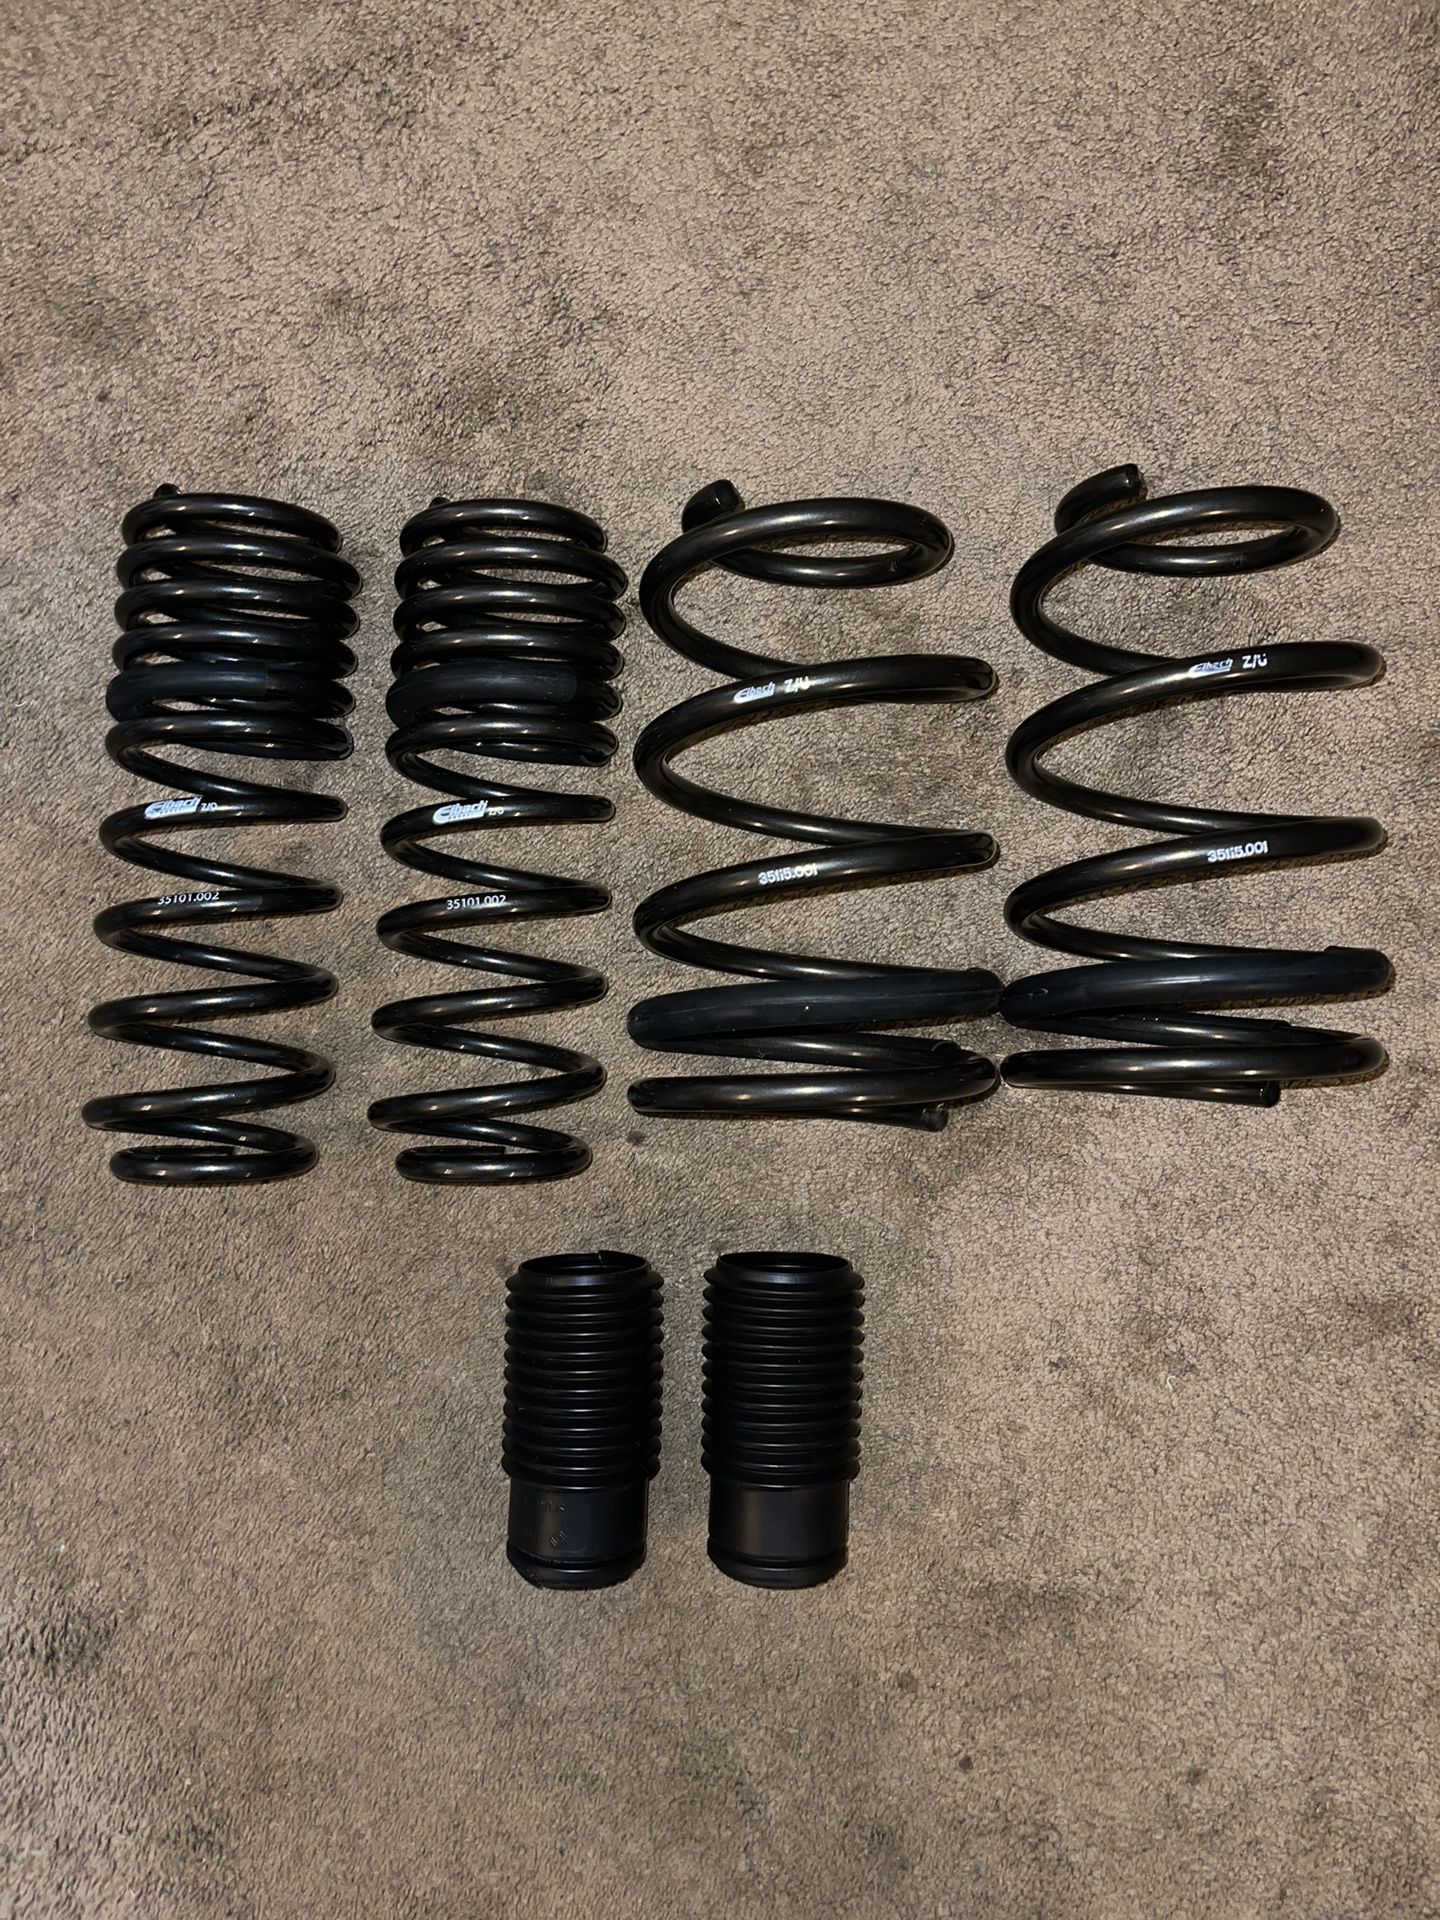 Ford Mustang Shelby GT500 Eibach Pro Kit Lowering Springs Brand New 